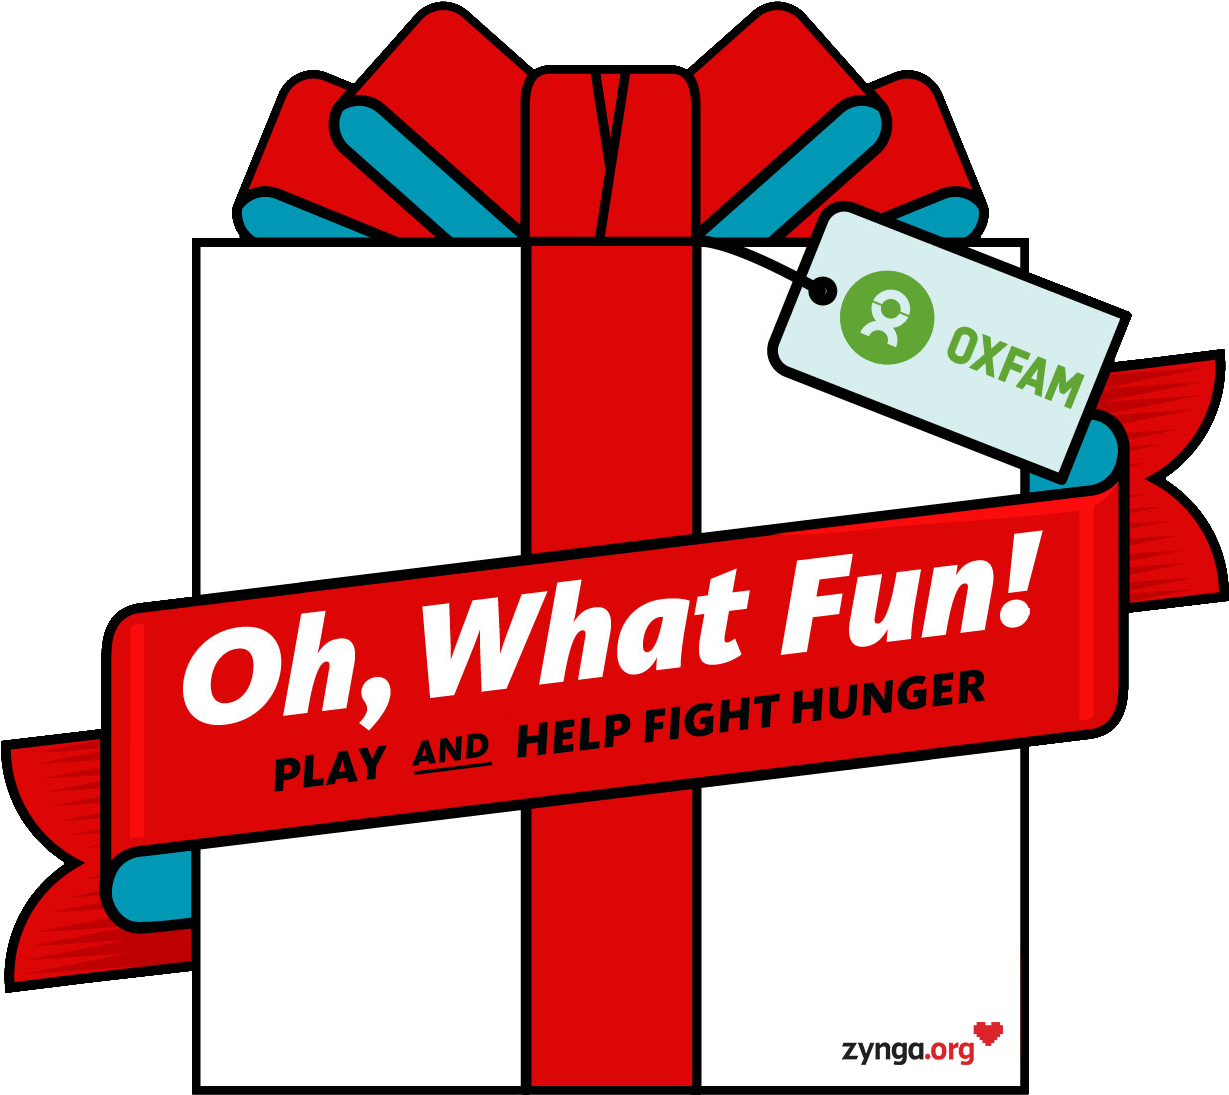 Zynga Partners With Oxfam For 4th Annual Oh, What Fun - Toys For Tots (1492x1236)